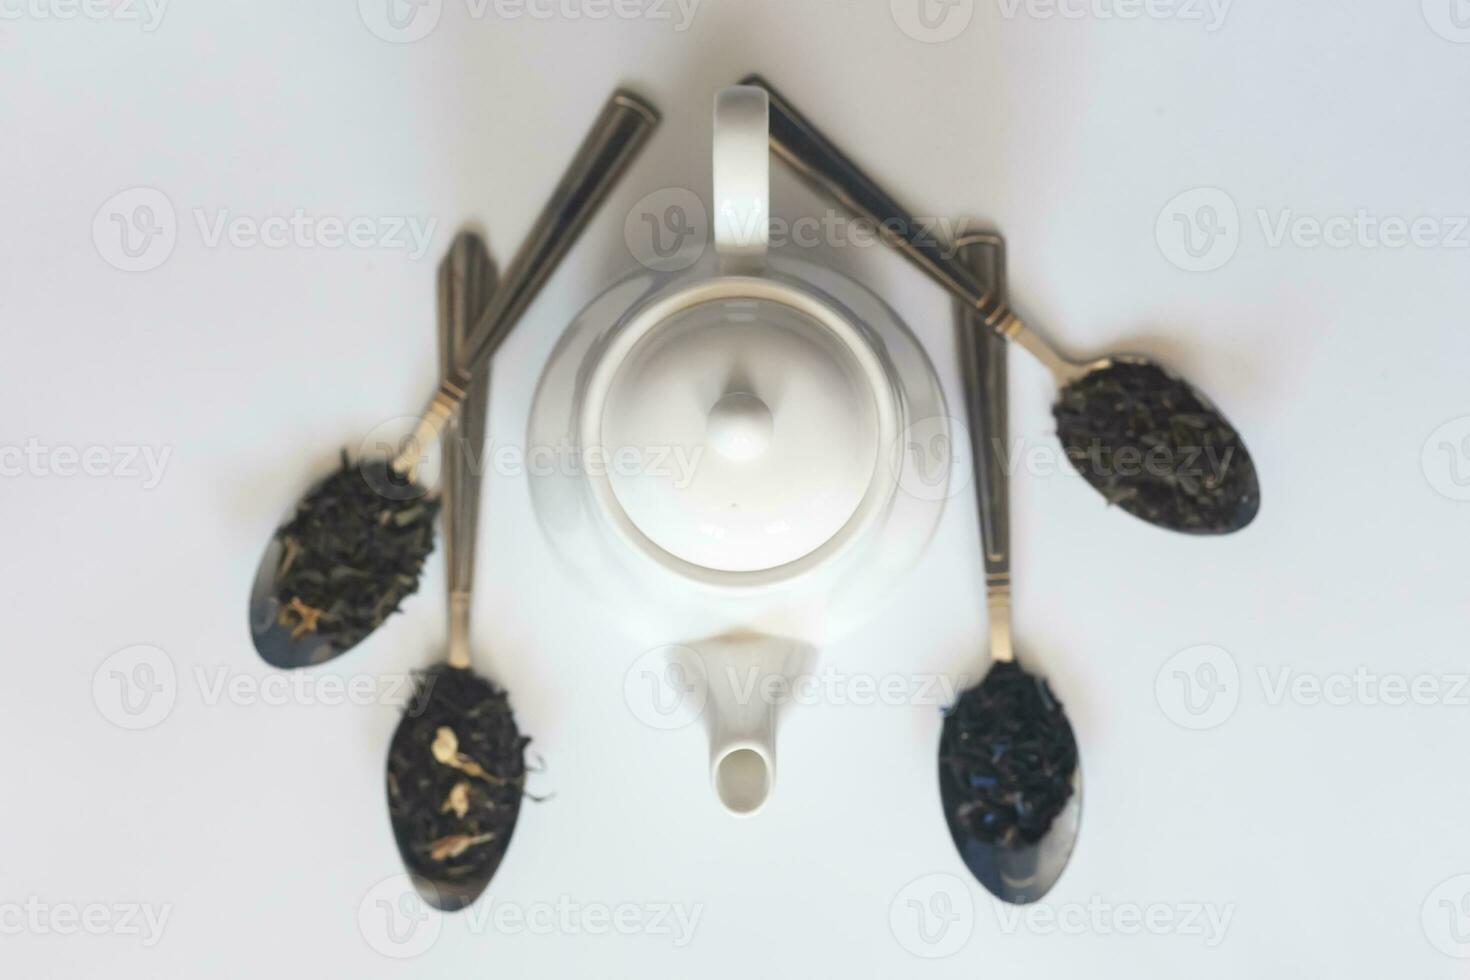 White ceramic tea pot and various dried teas on the white background. Flat lay view. Space for your text photo